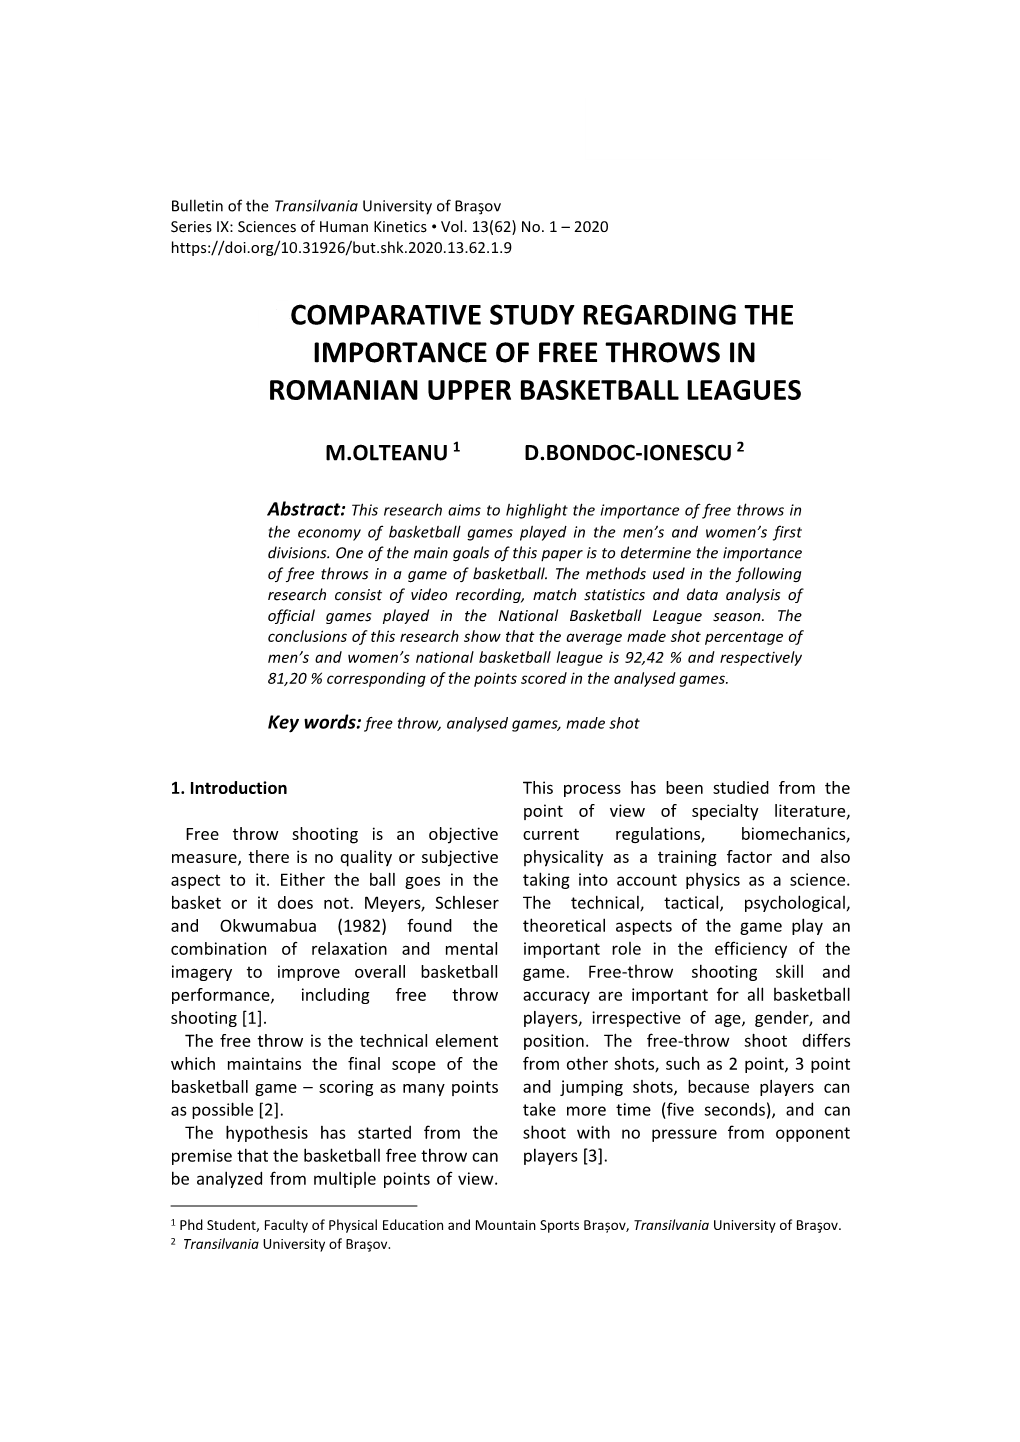 Scomparative Study Regarding the Importance of Free Throws in Romanian Upper Basketball Leagues